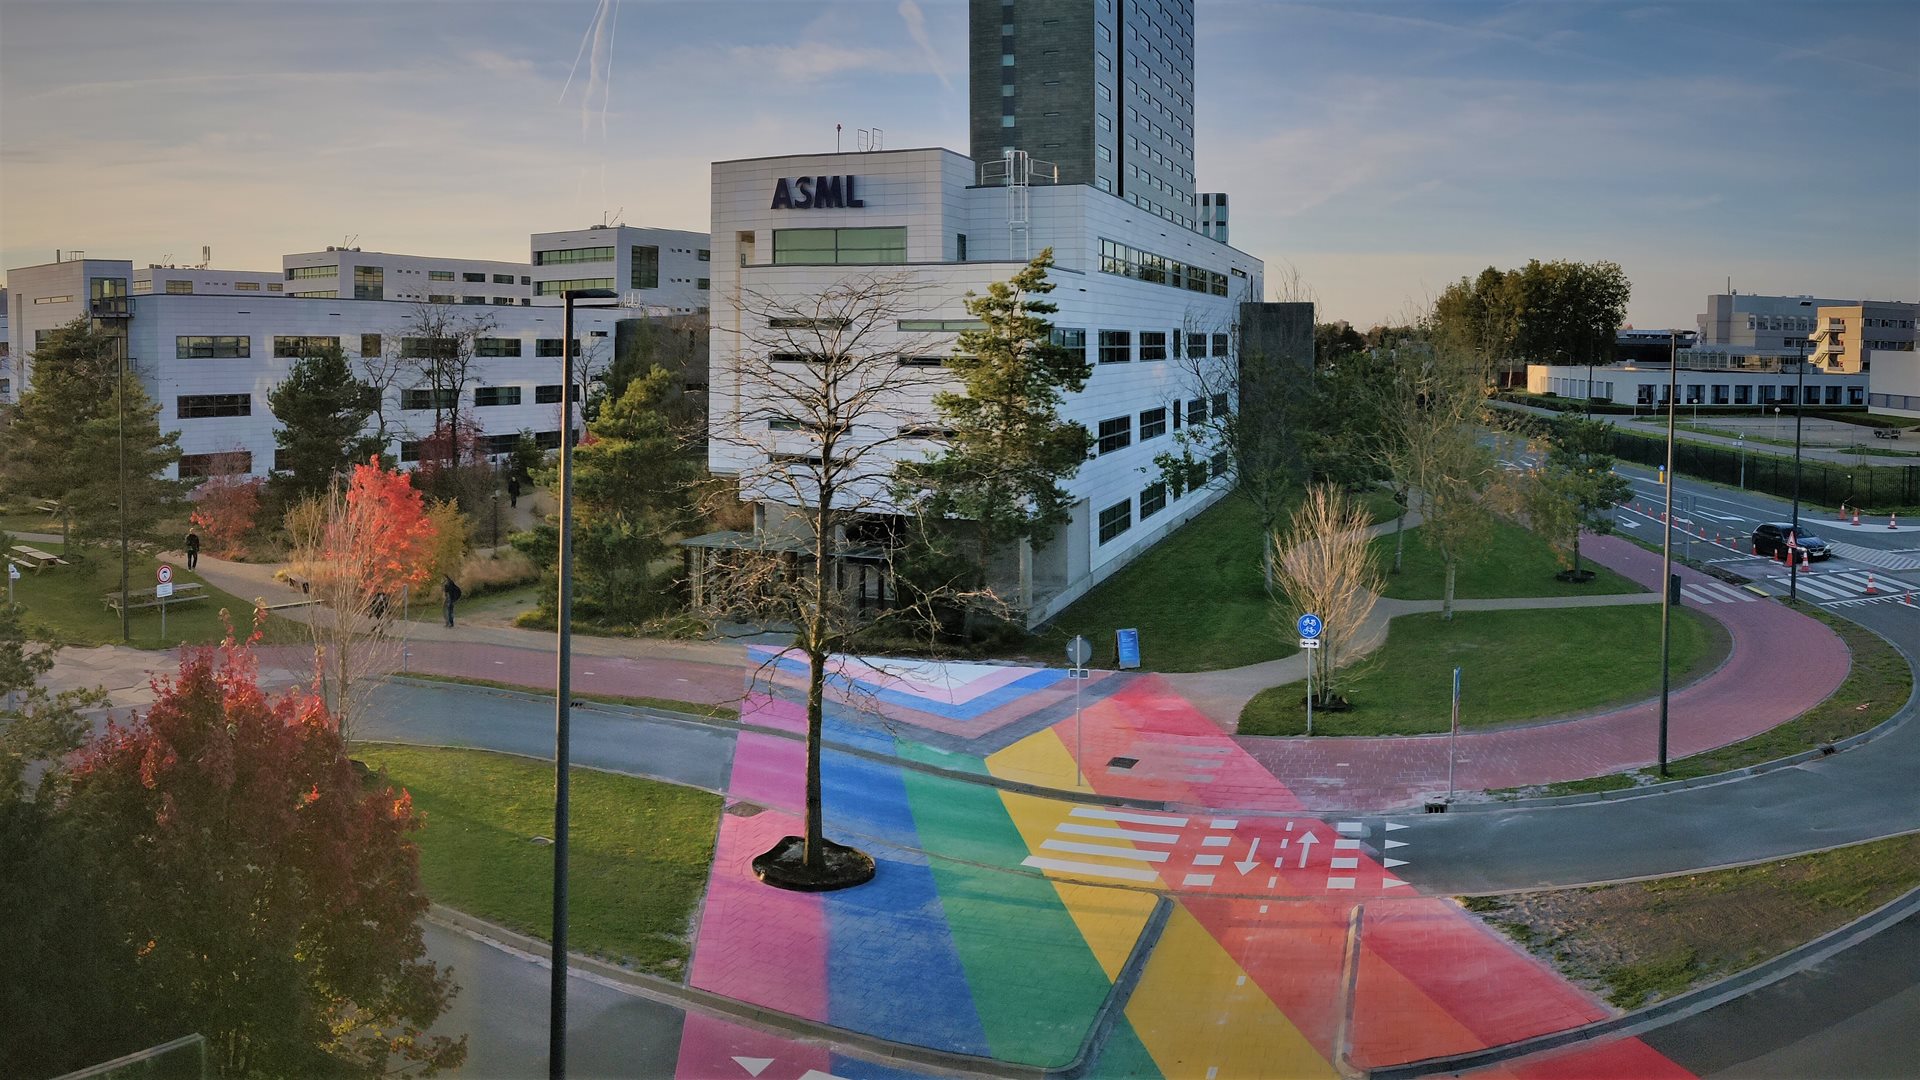 Proud: the story of ASML’s LGBTQIA+ employee network